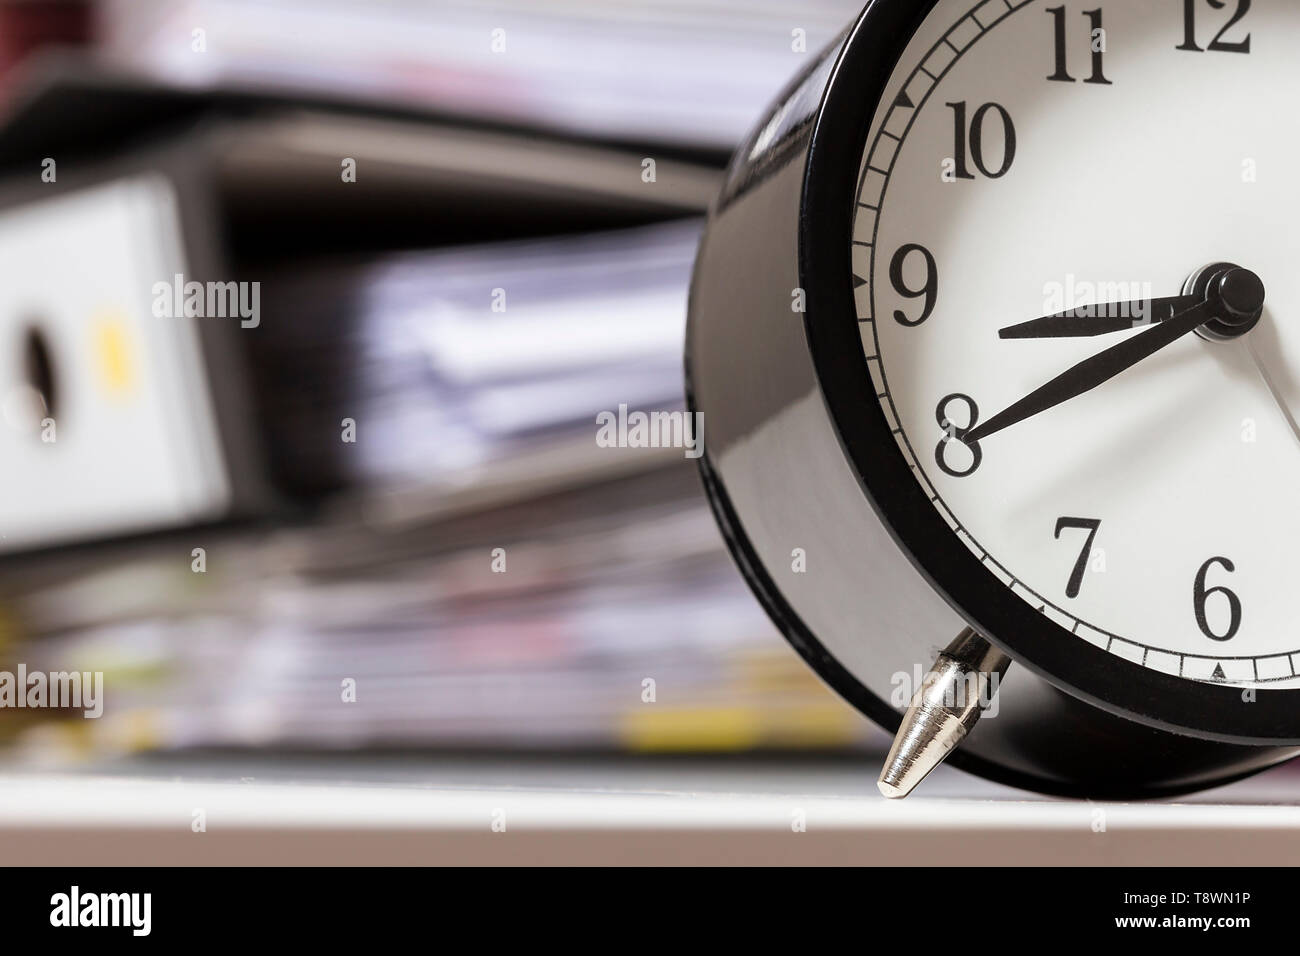 Alarm clock in an office next to a pile of files Stock Photo